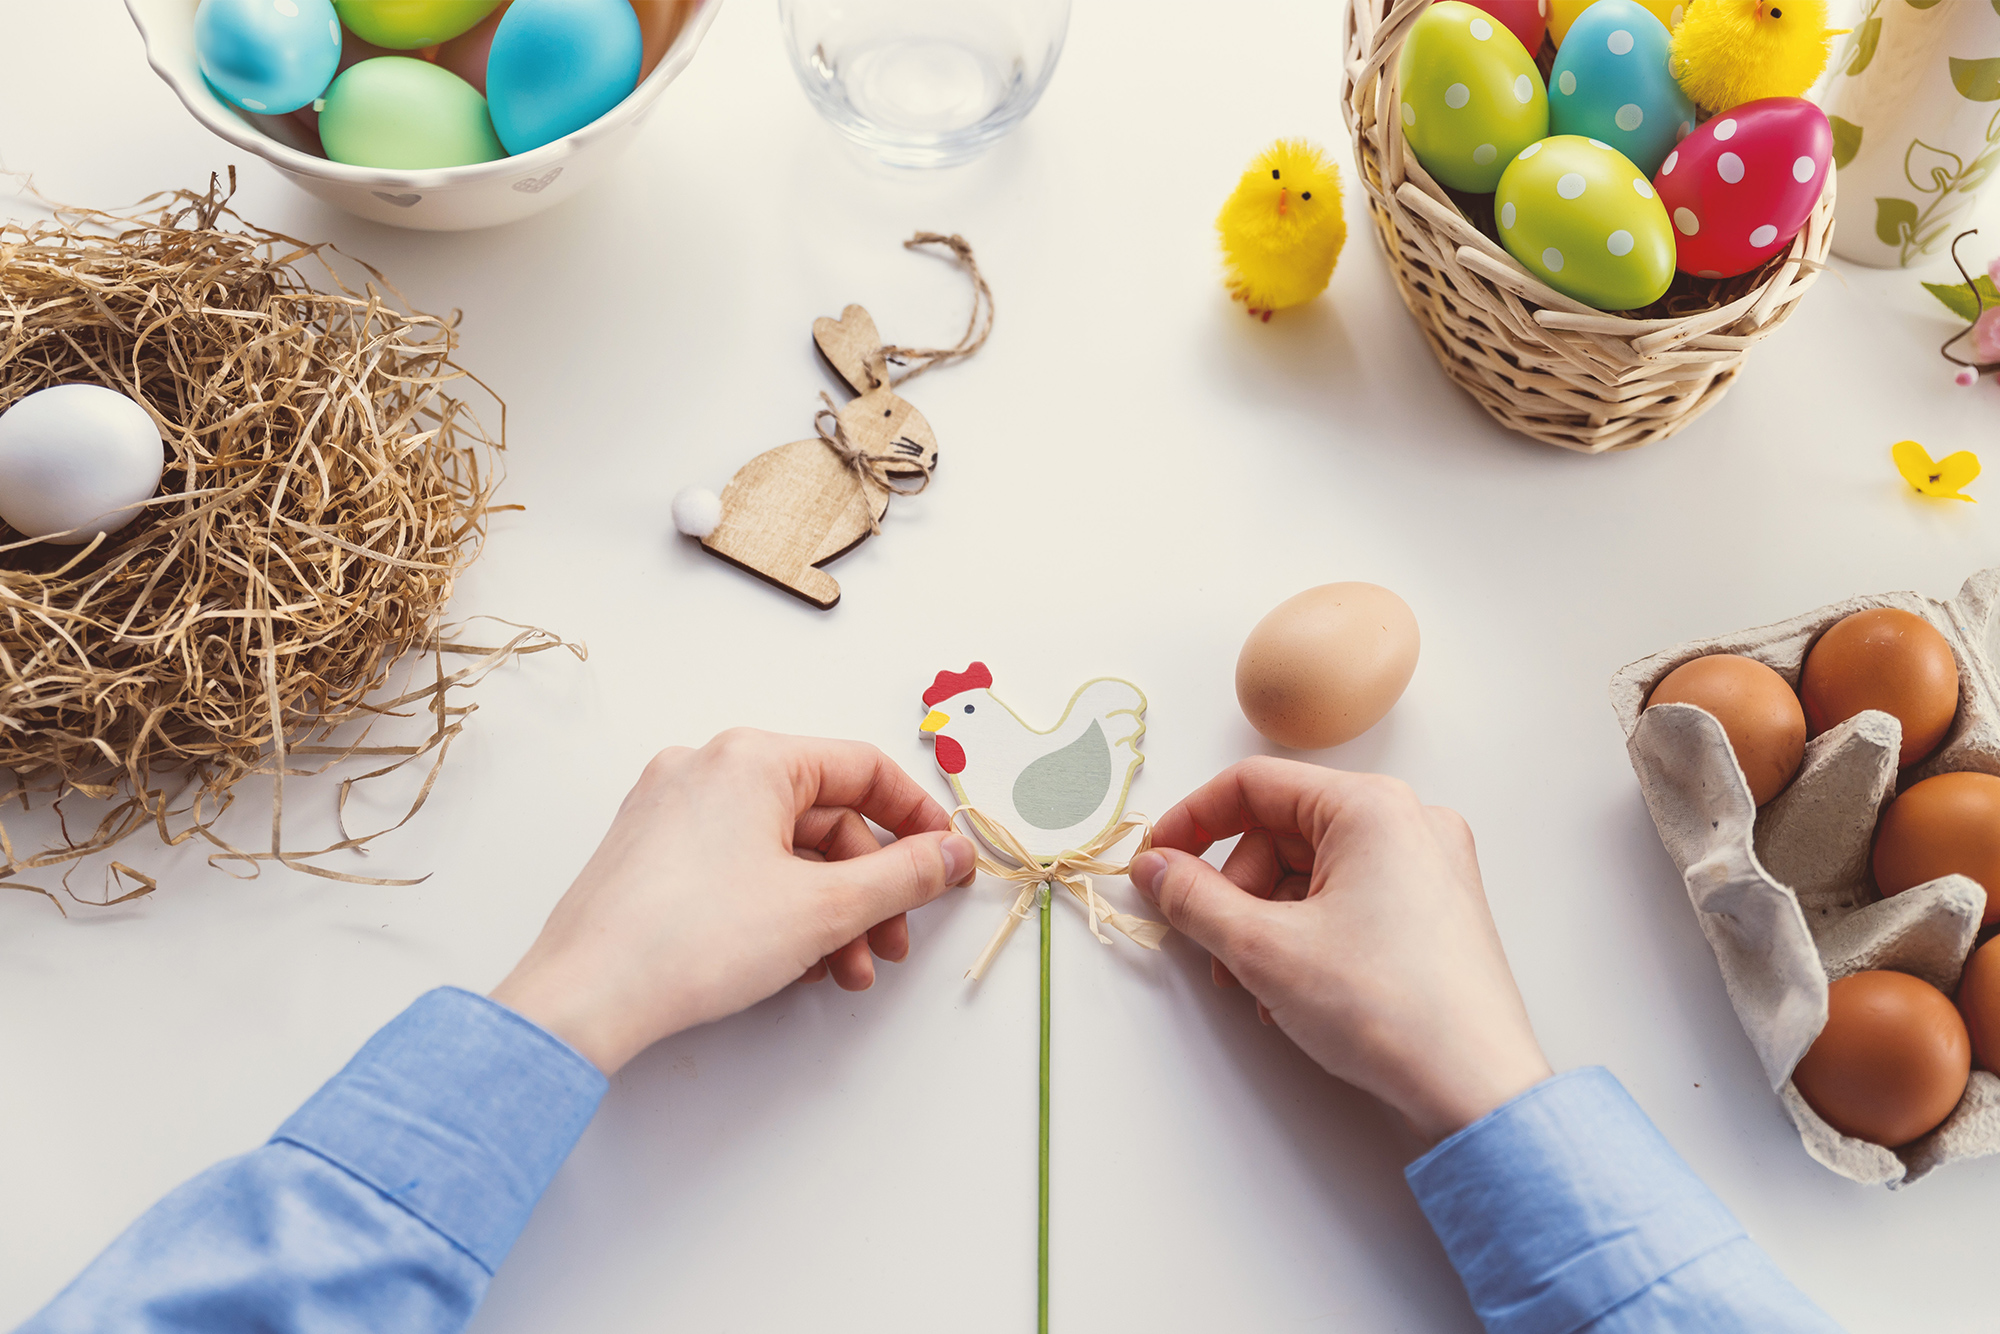 woman preparing easter eggs and easter decorations